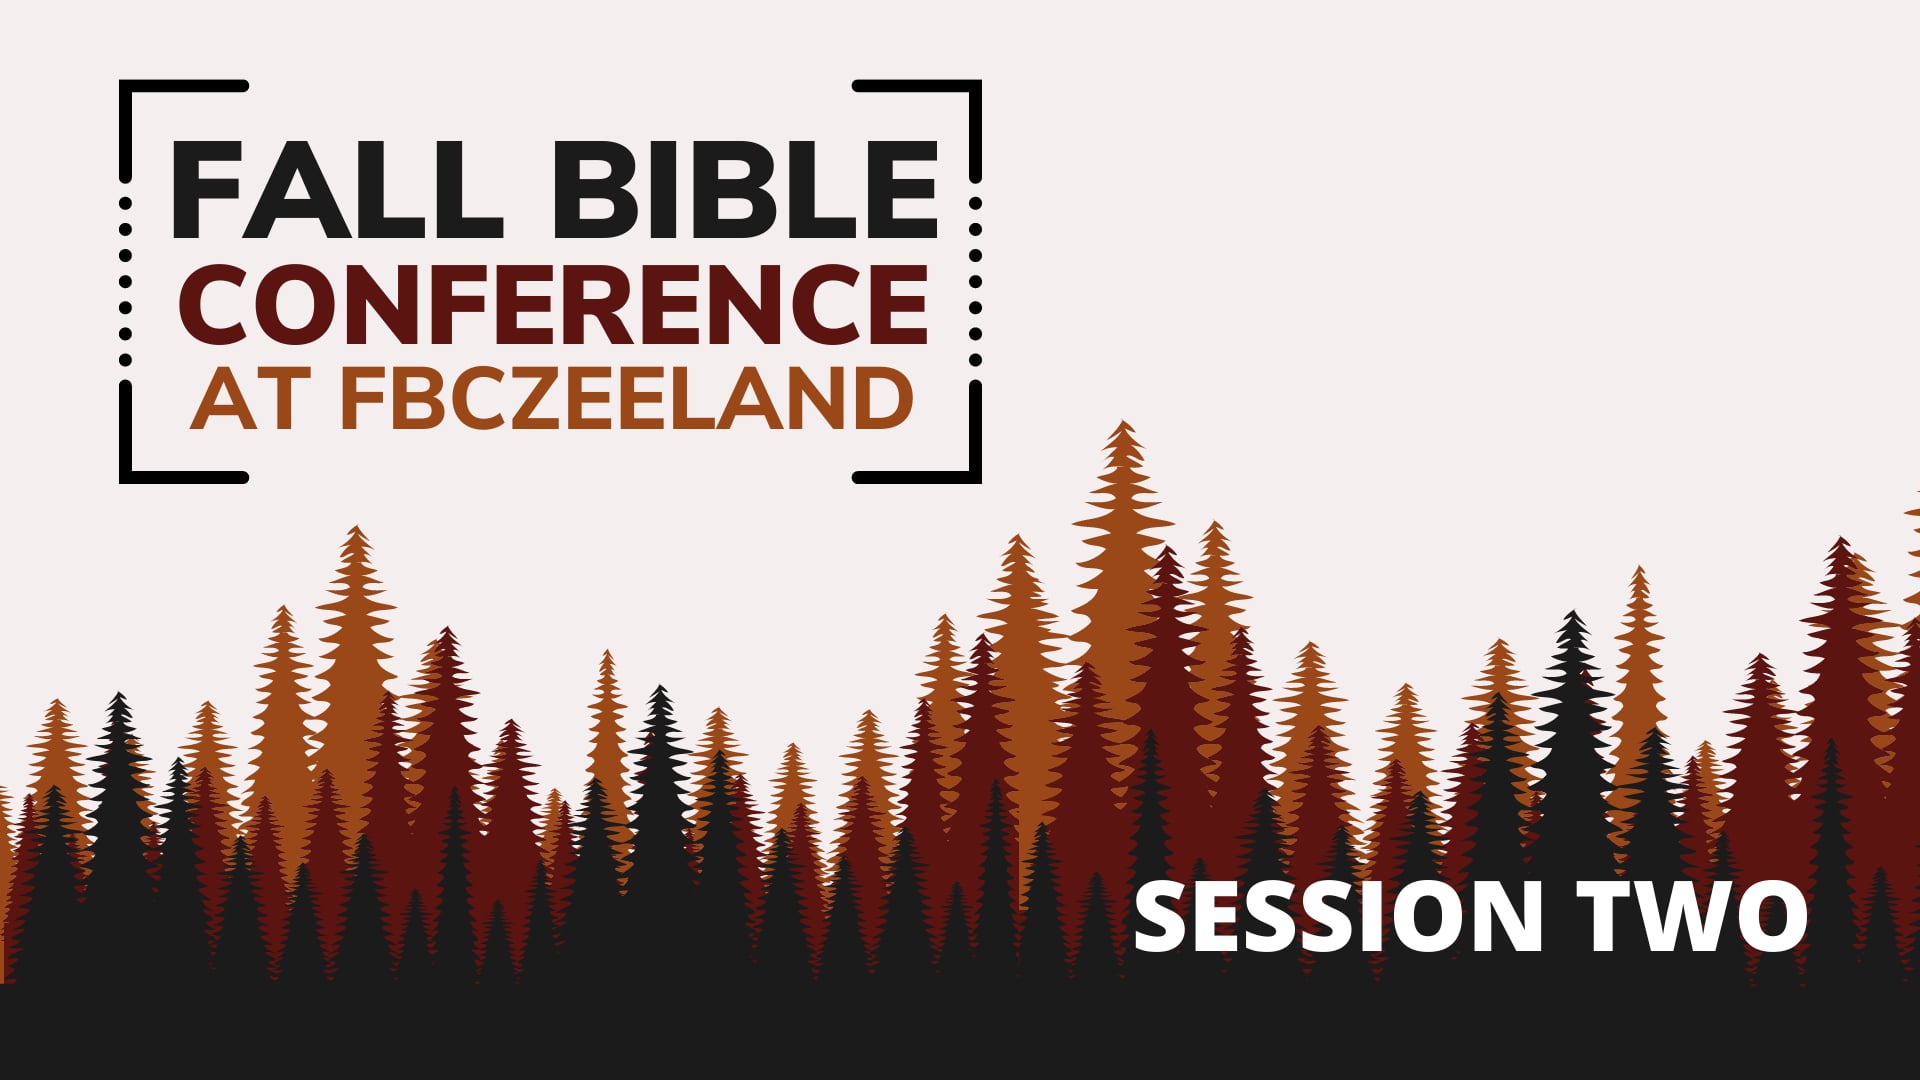 FBC Fall Bible Conference Session 2